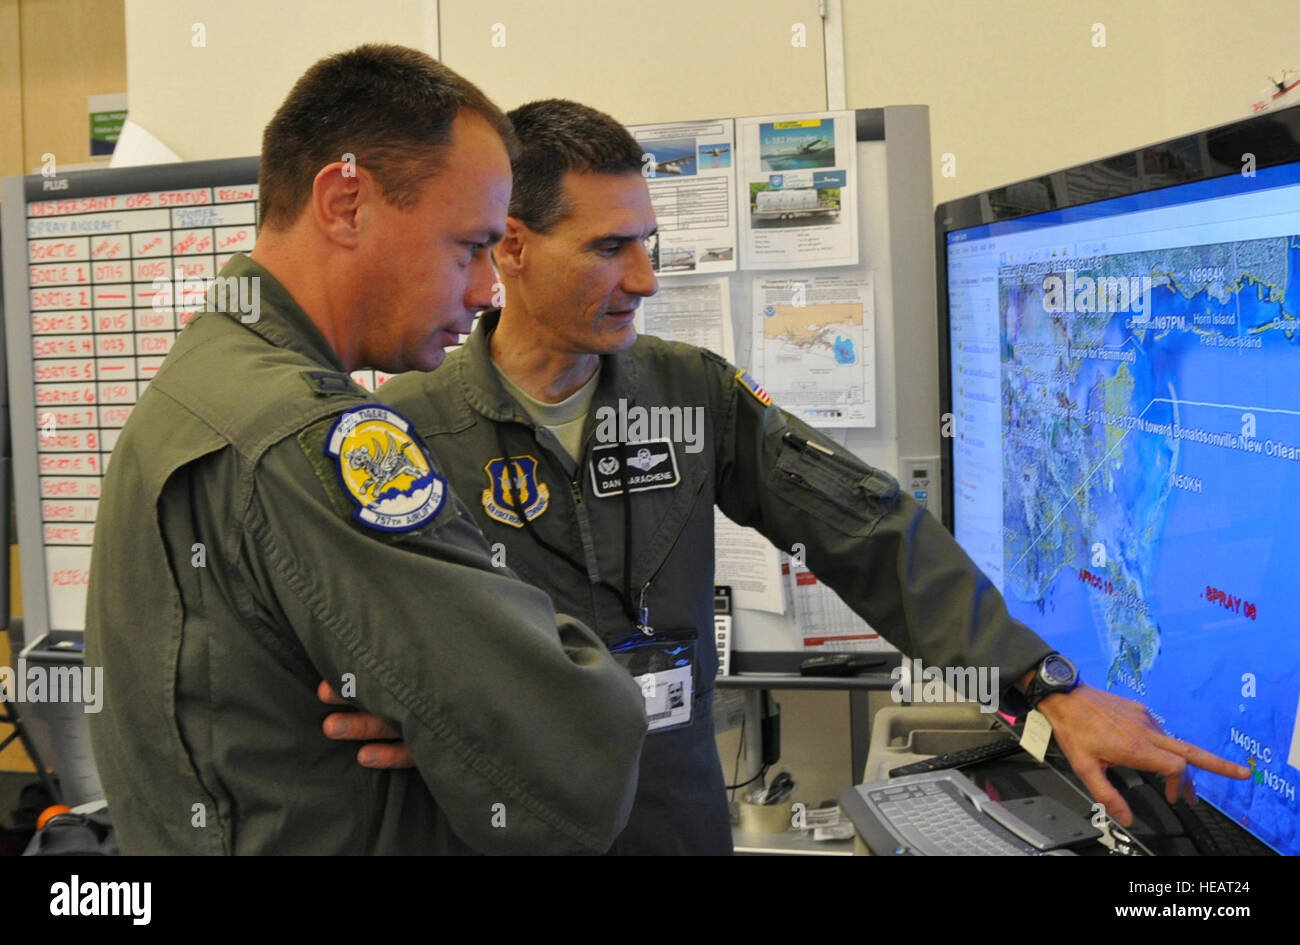 HOUMA, LA -- Air Force Reserve Lt. Col. Dan Sarachene (rear) reviews a map of the Gulf of Mexico with Capt. Travis Adams at the Unified Incident Command. Capt. Adams prepares to relieve Lt. Col. Sarachene and continue service as an Air Force liason between the 910th Airlift Wing's aerial spray mission operations and BP oversight for oil spill mitigation.   The 910th Airlift Wing has been aerial spraying dispersant over oil slicks since May 1 following the explosion on the Mobile Offshore Drilling Unit Deepwater Horizon.   Maj. Brent Davis. Stock Photo